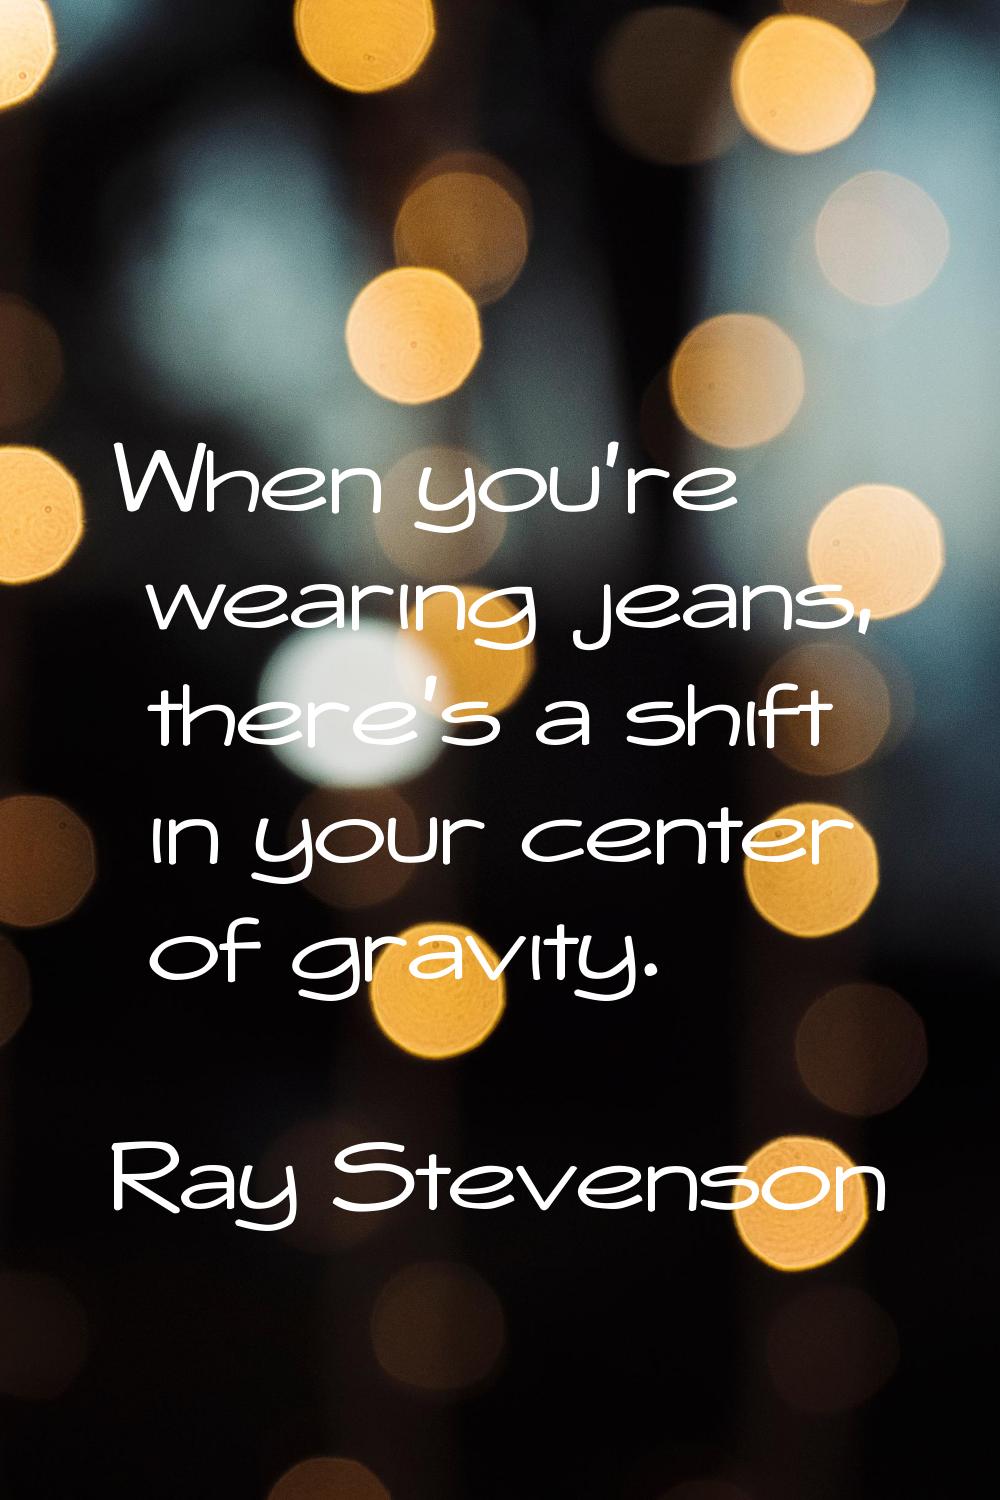 When you're wearing jeans, there's a shift in your center of gravity.